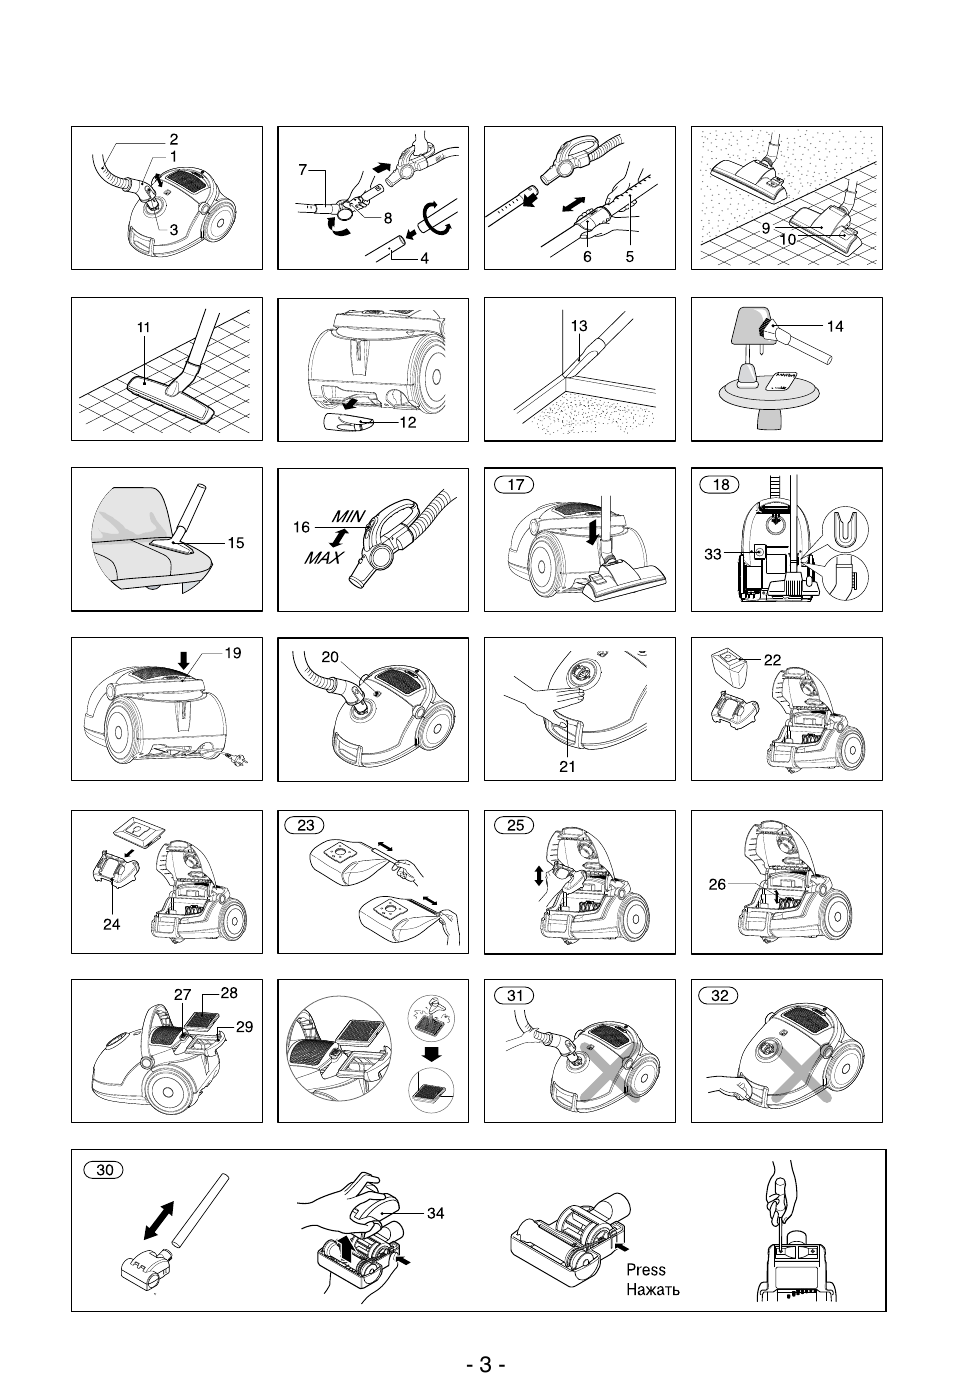 LG VC39172H User Manual | Page 3 / 16